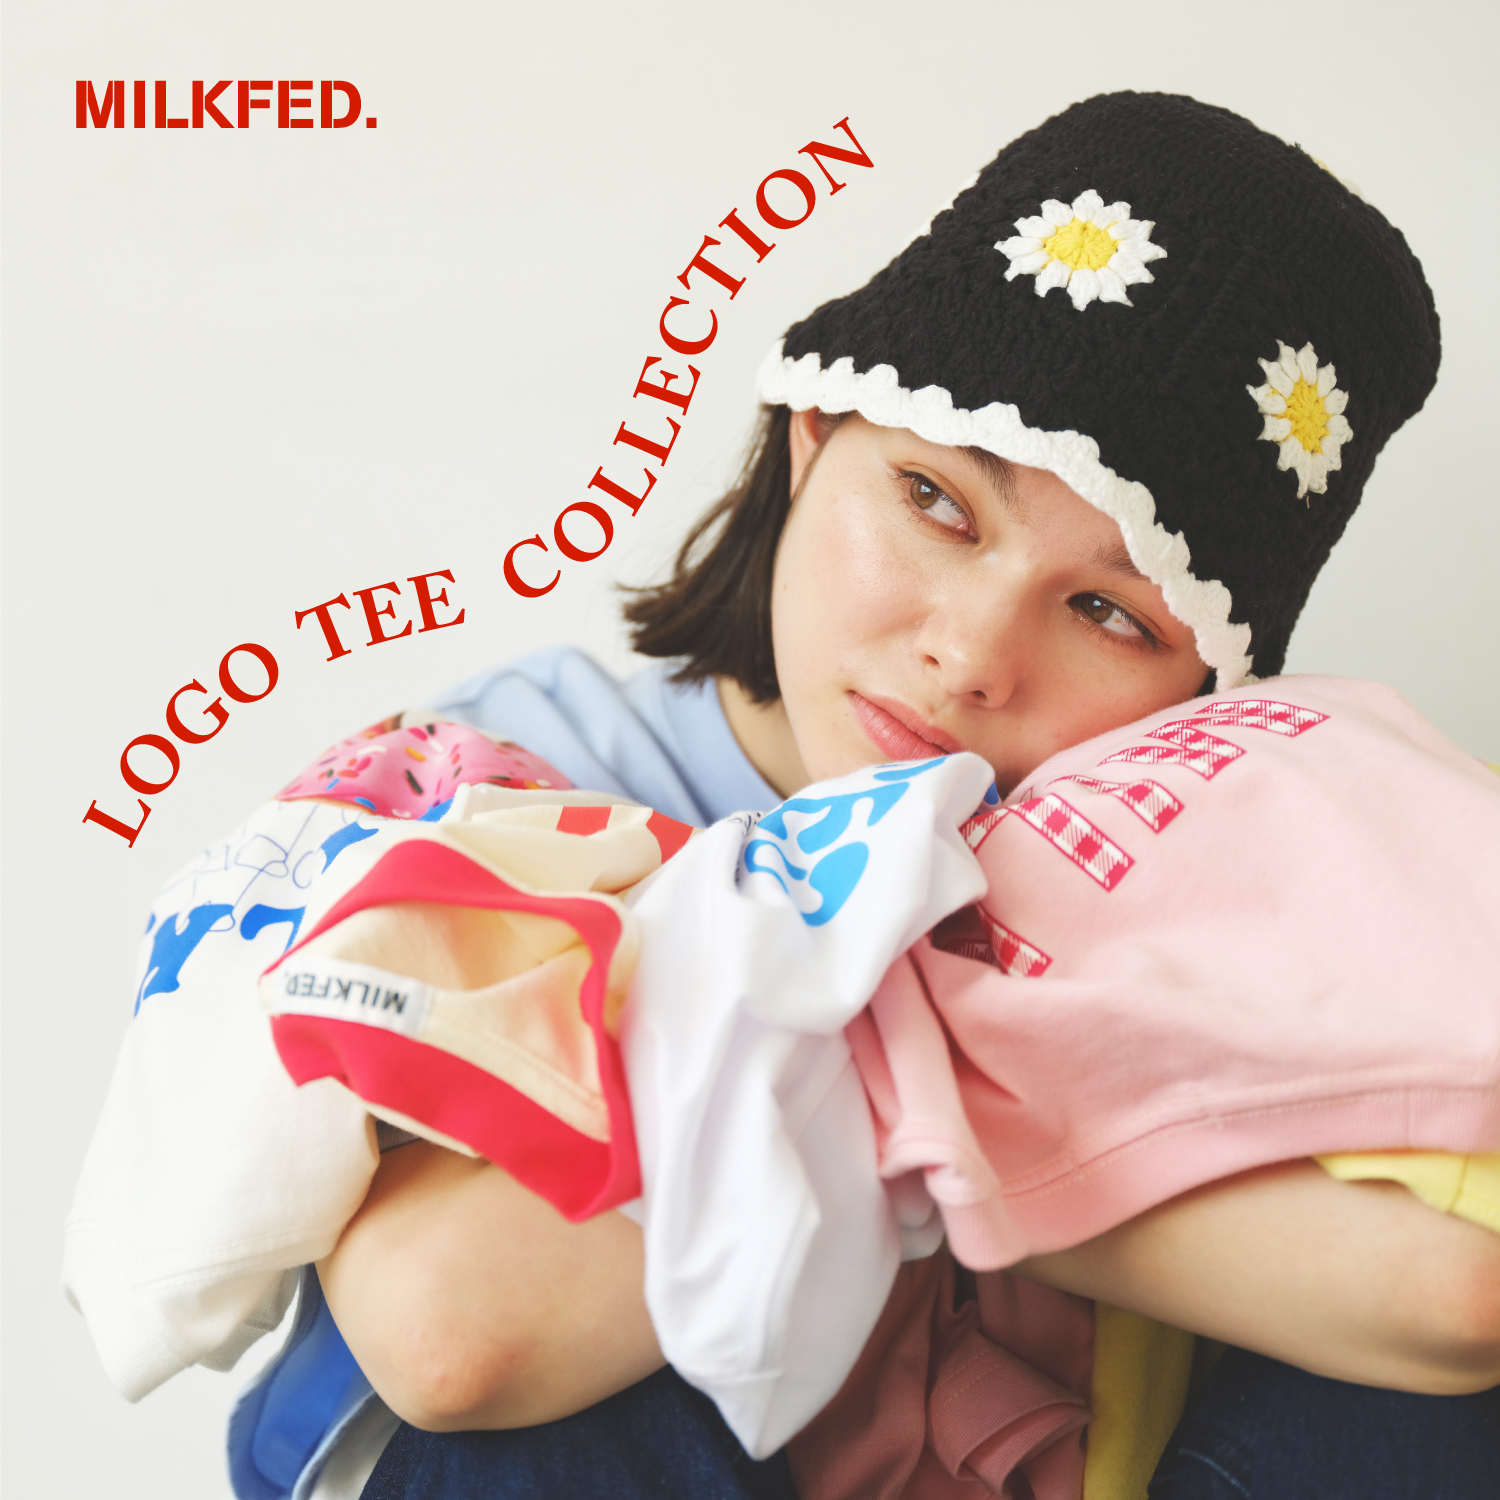 MILKFED.OUTER COLLECTION “AIRI SUGIMOTO” VOl.2 : MILKFED. OFFICIAL 